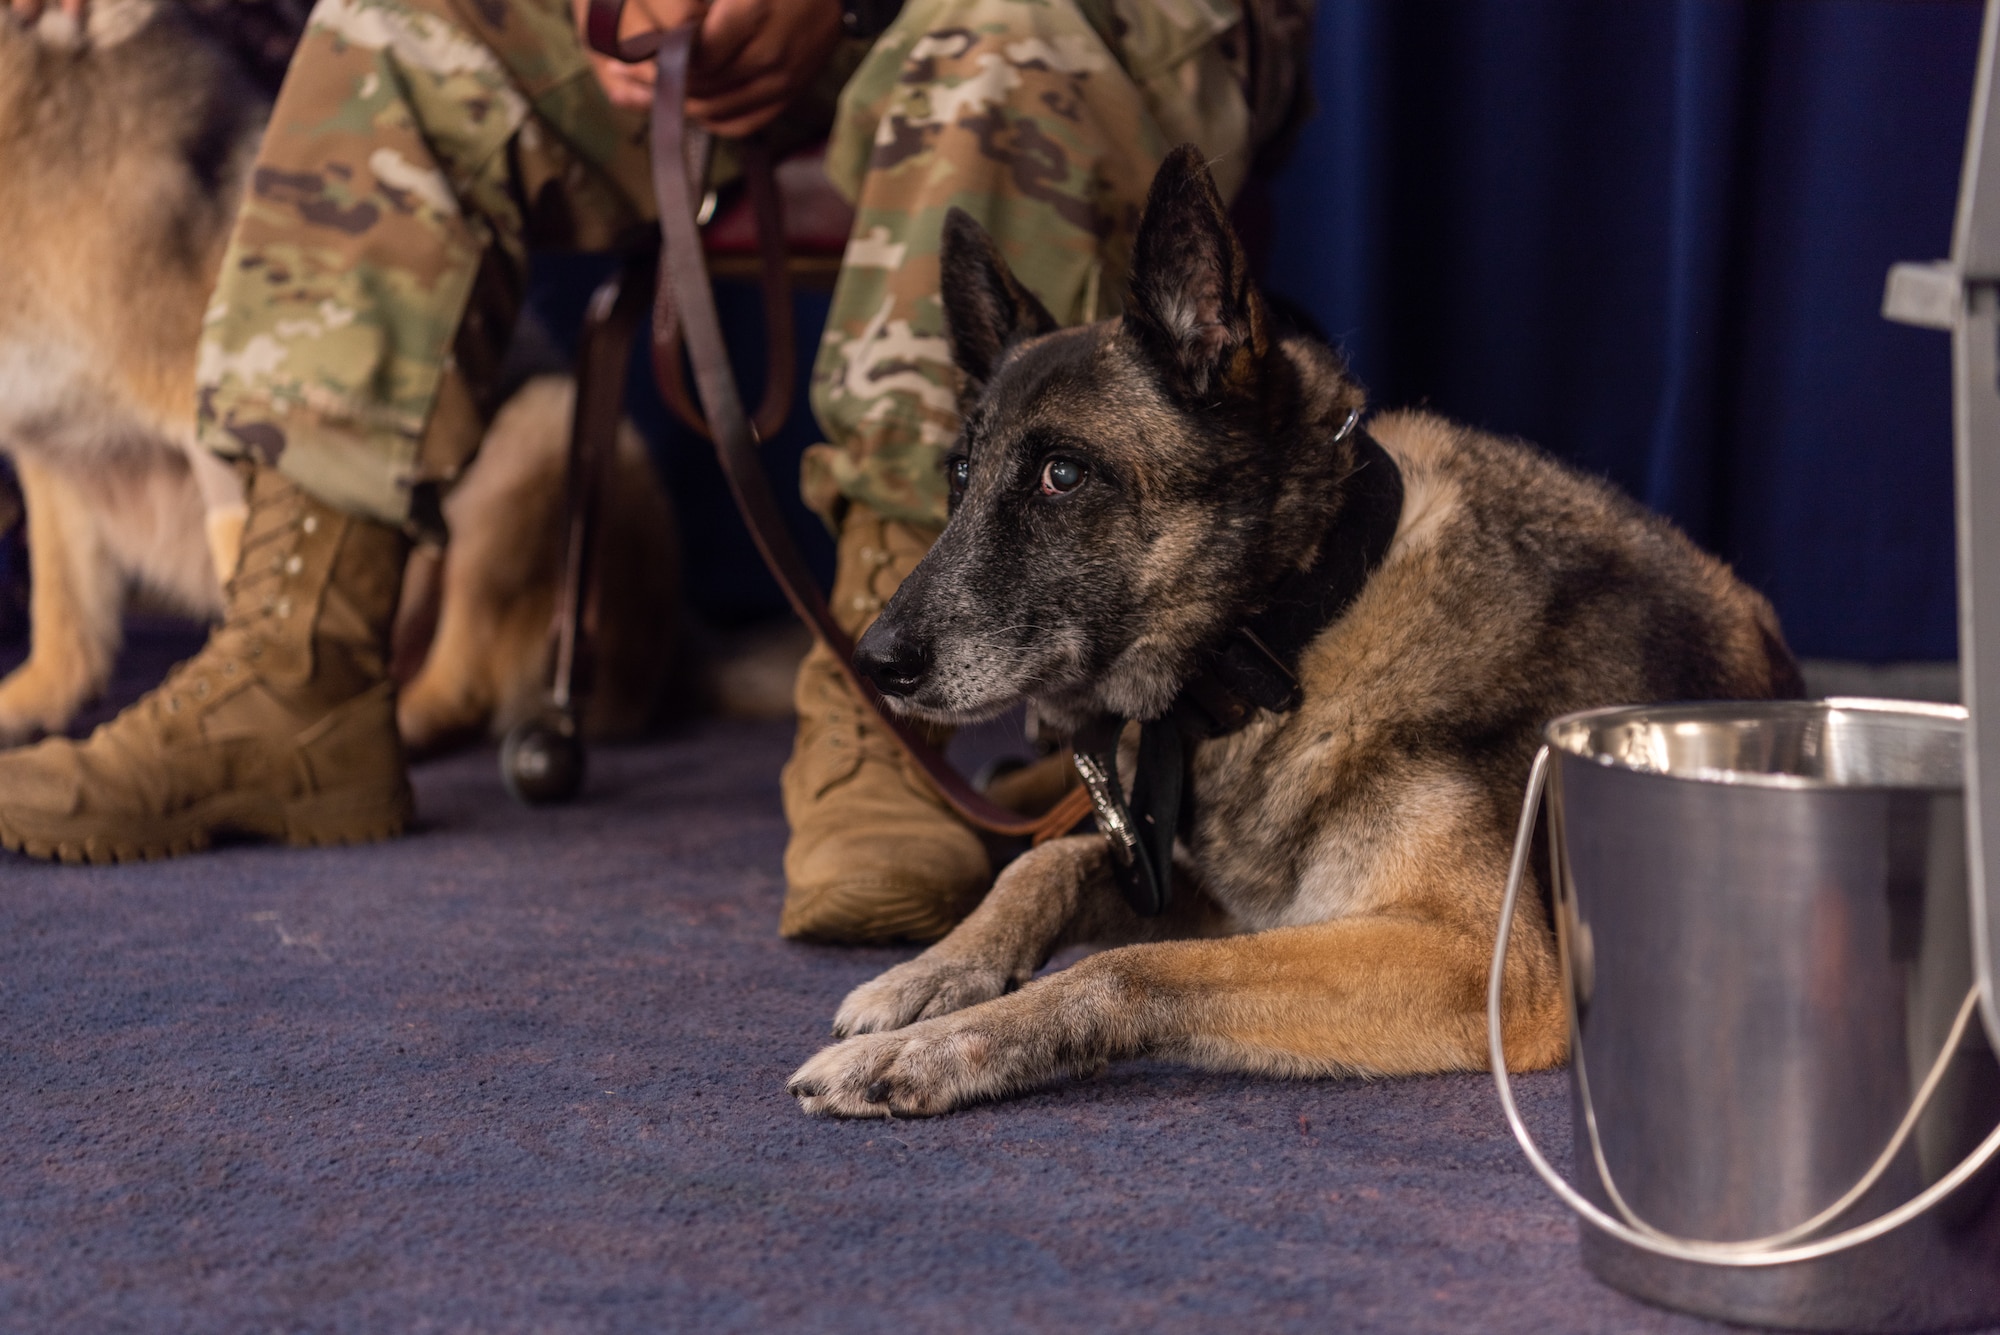 U.S. Air Force military working dog (MWD) Judi, assigned to the 18th Security Forces Squadron, sits by her MWD handler during a MWD retirement ceremony July 26, 2019, on Kadena Air Base, Japan. Judi retired at 13 years old with 11 years of service to the U.S. Air Force. (U.S. Air Force photo by Senior Airman Cynthia Belío)